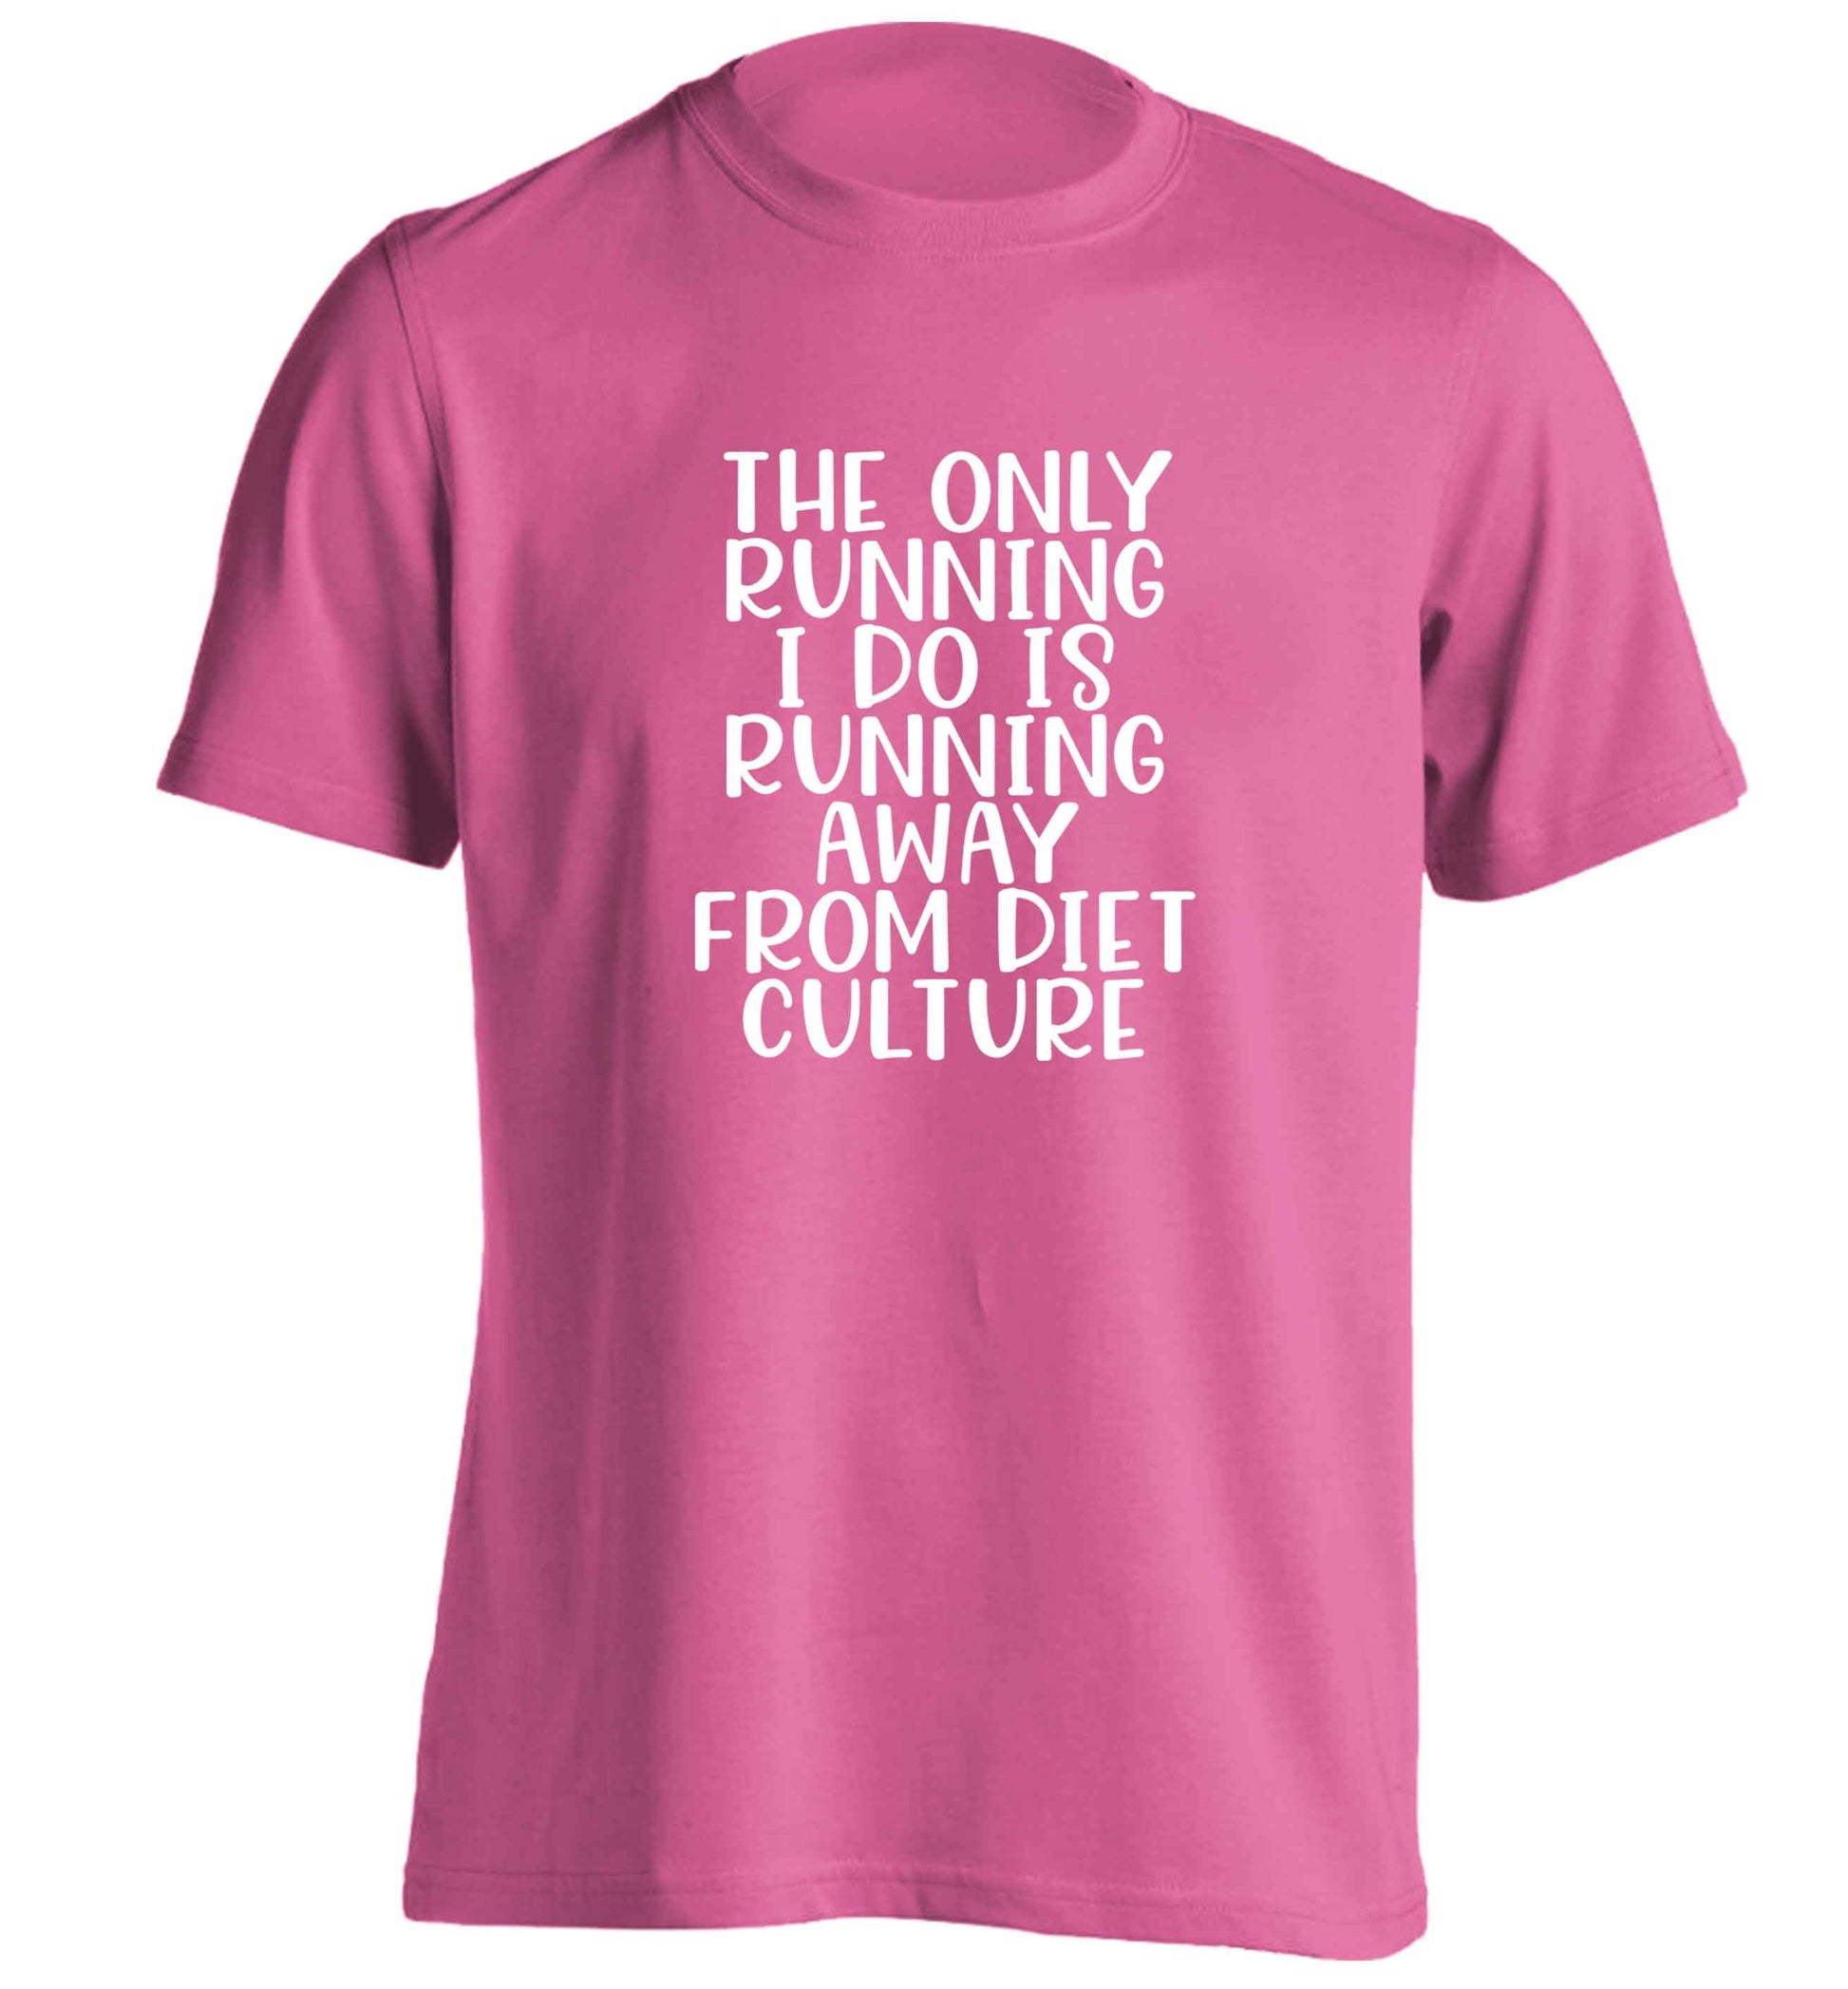 The only running I do is running away from diet culture adults unisex pink Tshirt 2XL